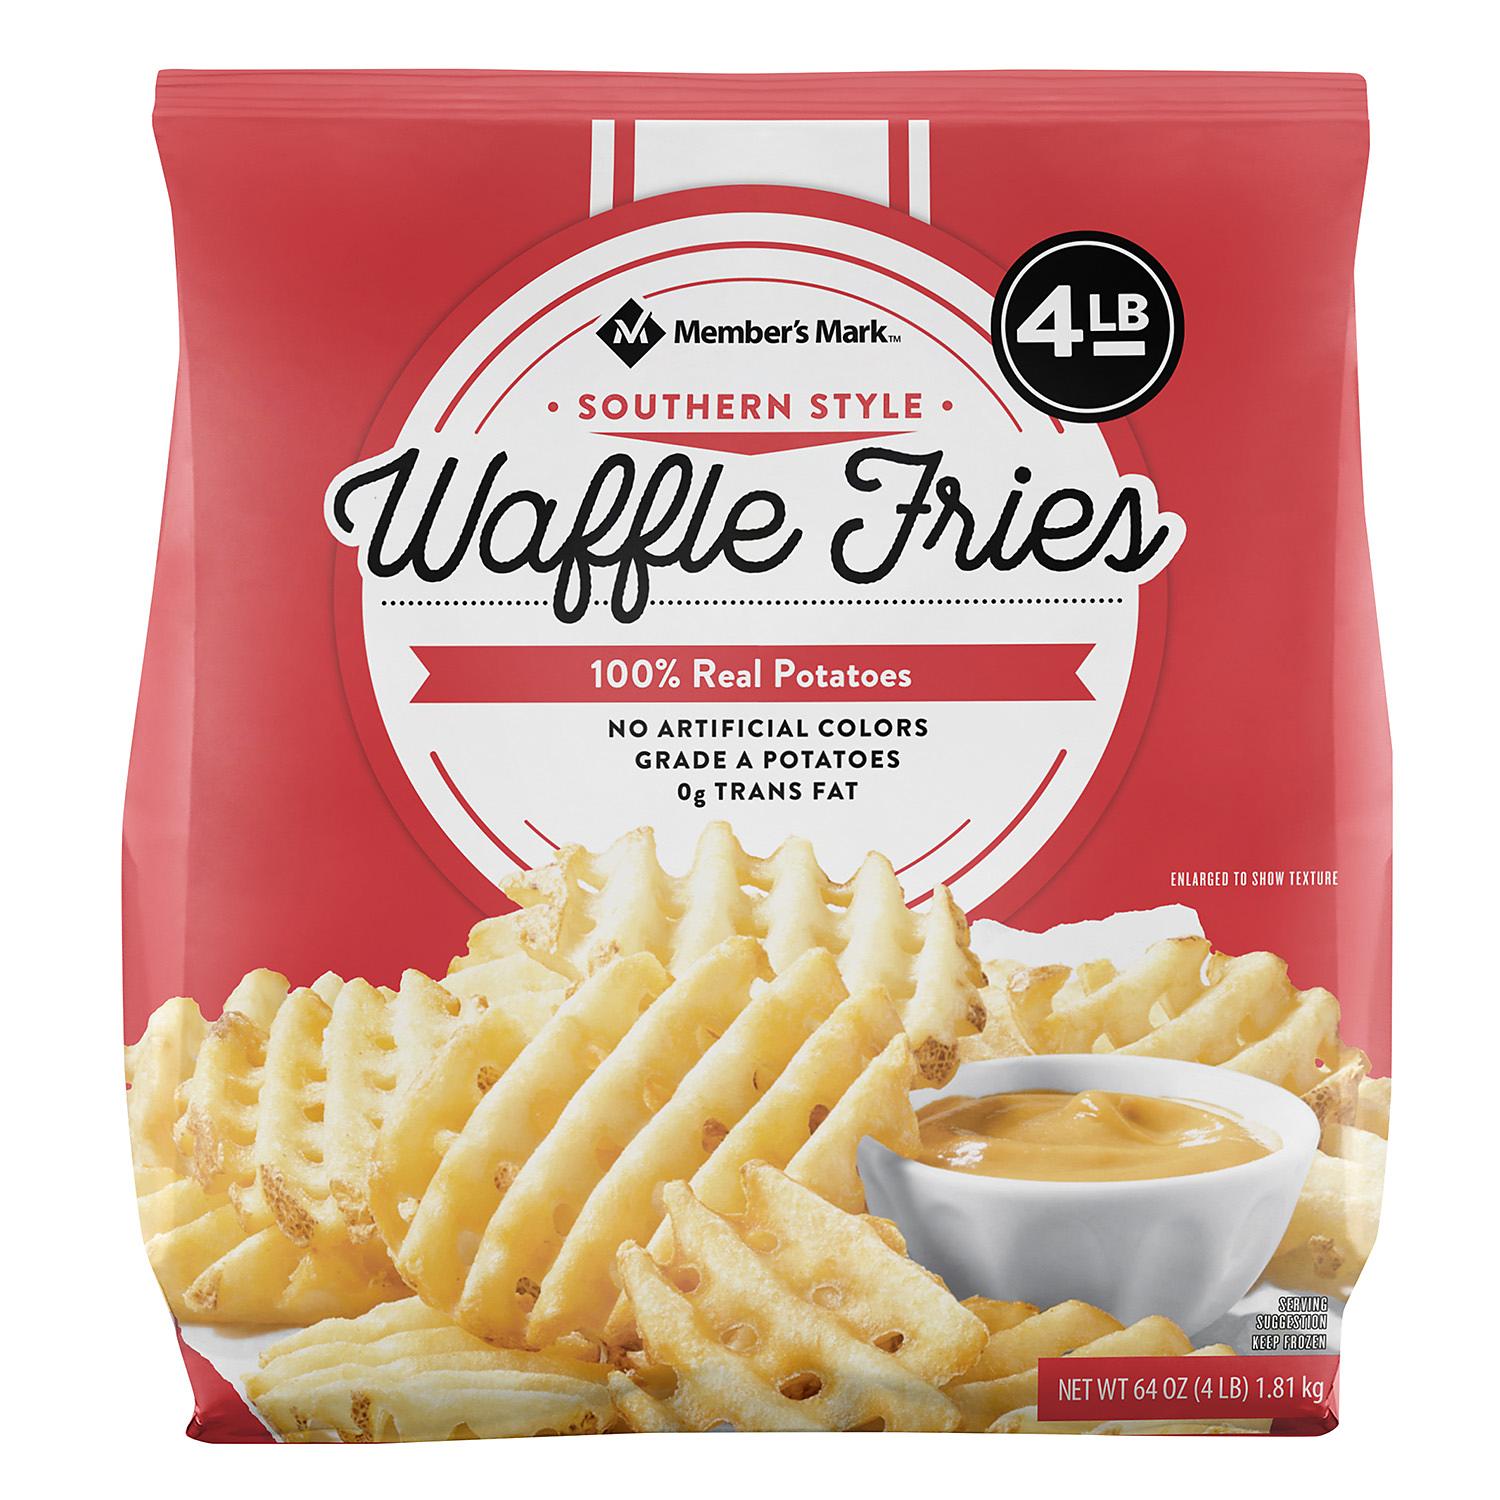 Member's Mark Southern Style Waffle Fries, 4 Lb